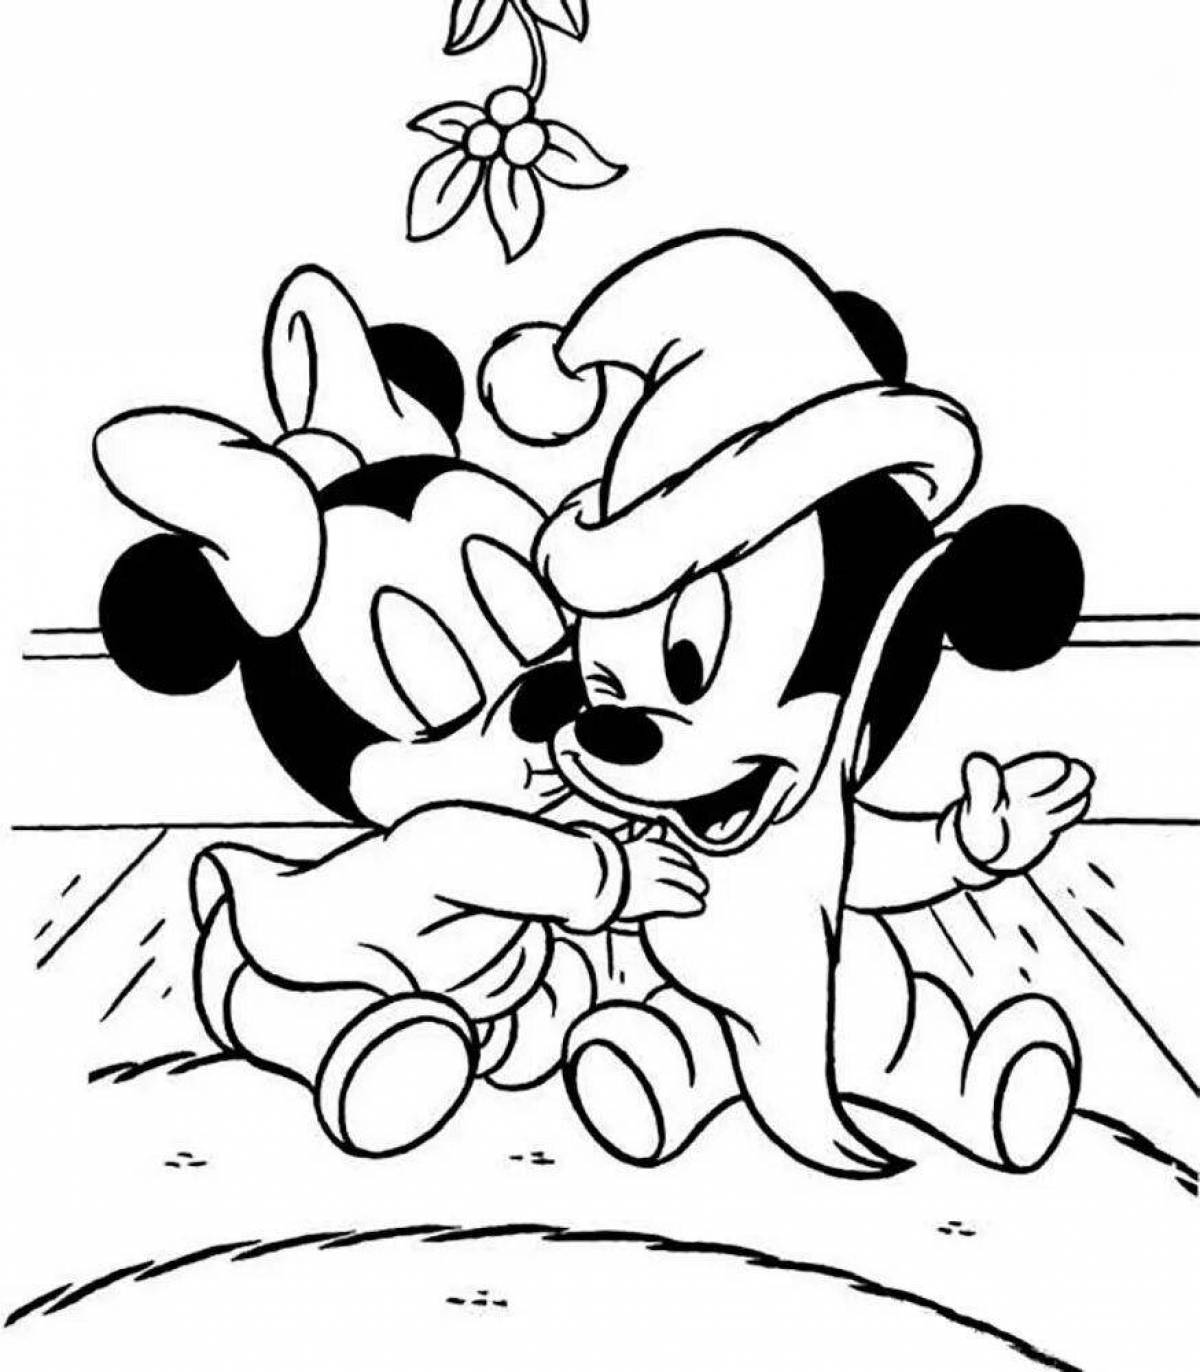 Disney coloring pages for kids